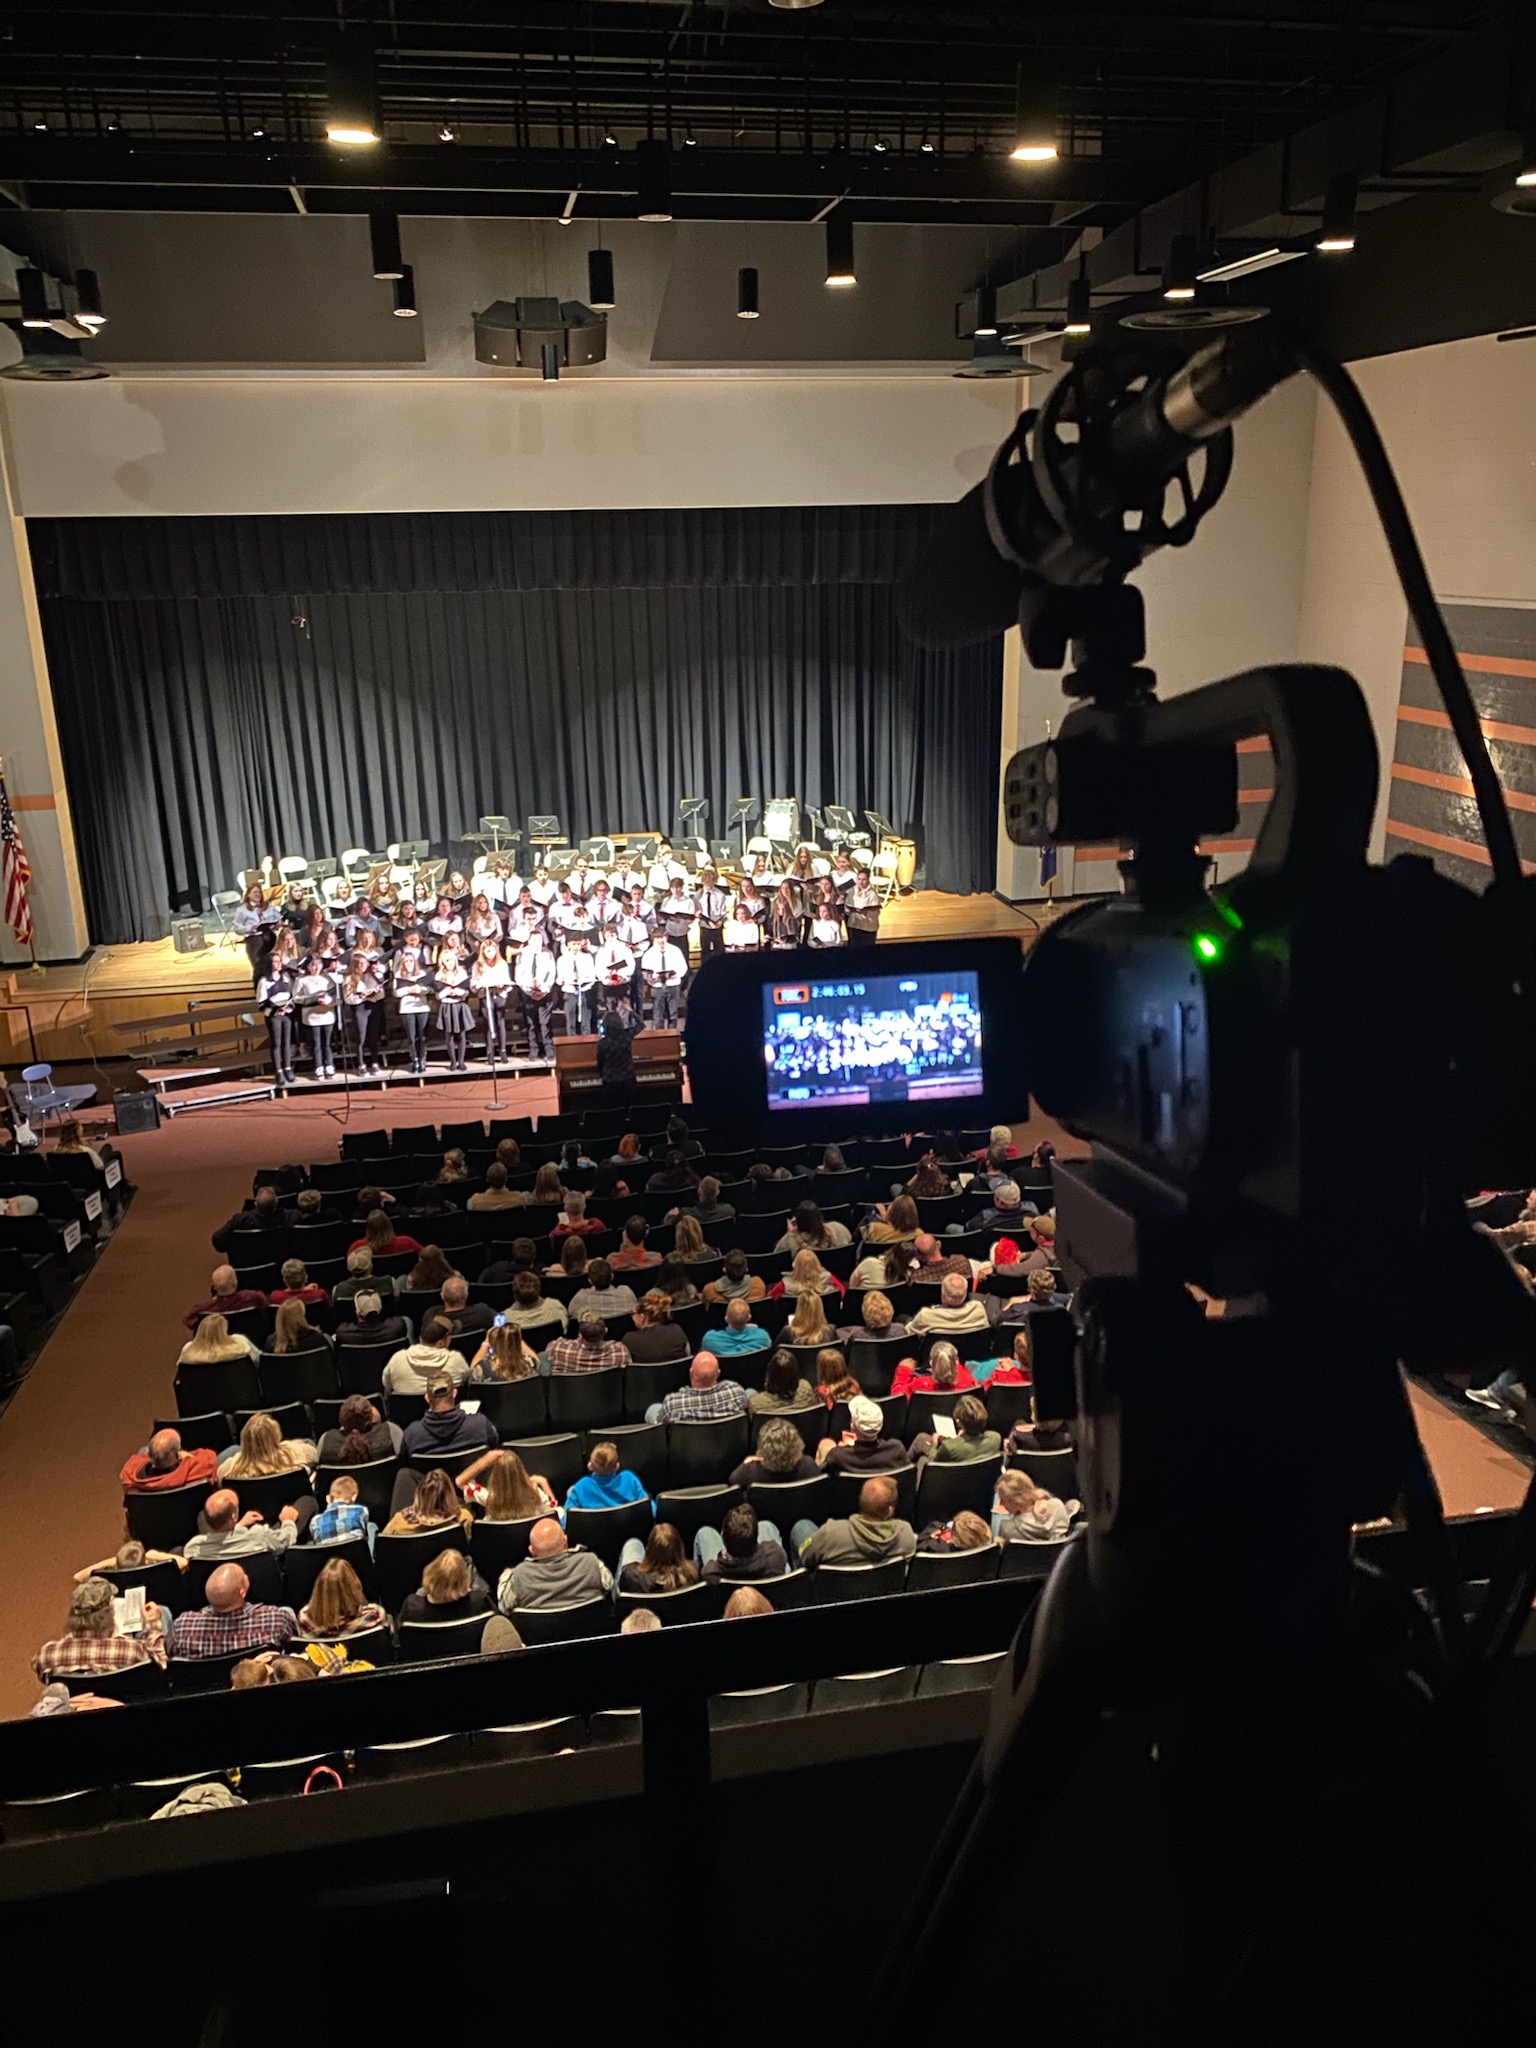 Video camera recording student choral concert.